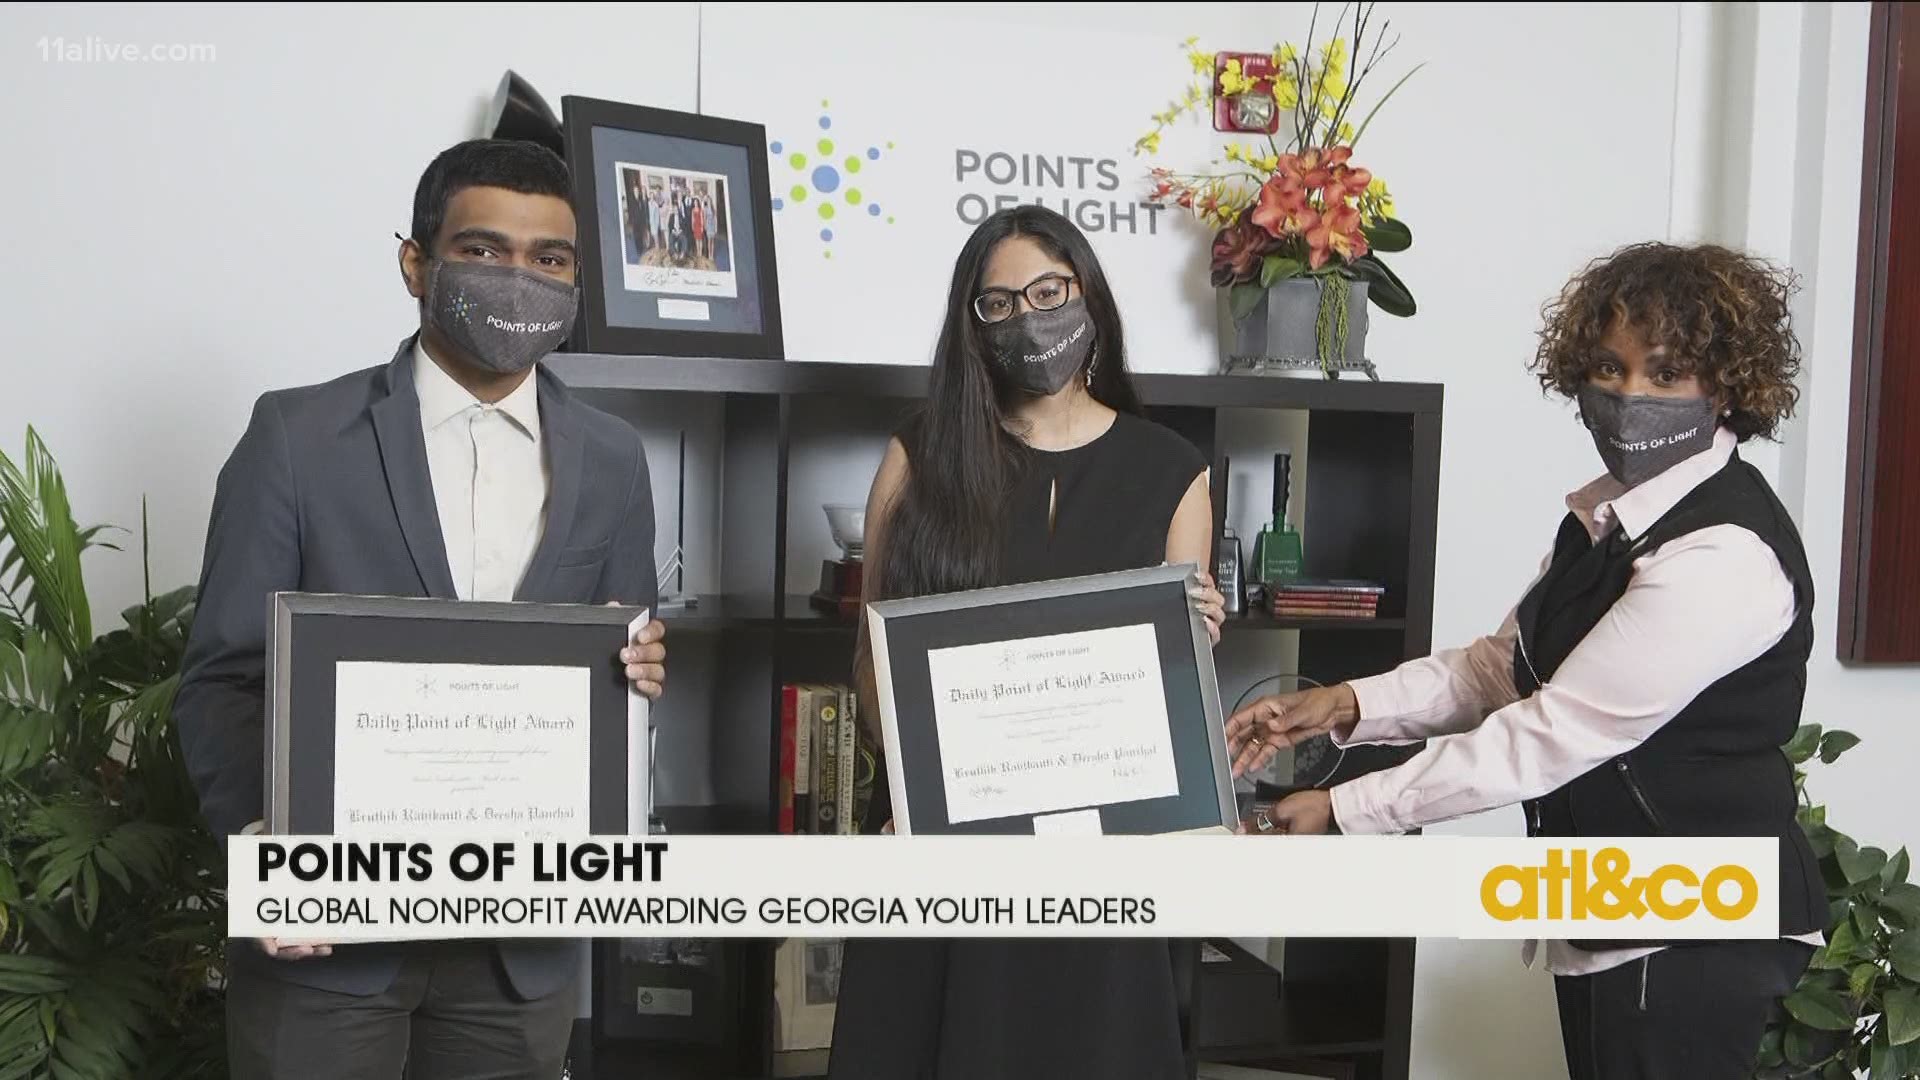 See how global nonprofit Points of Light is awarding Georgia's youth leaders.